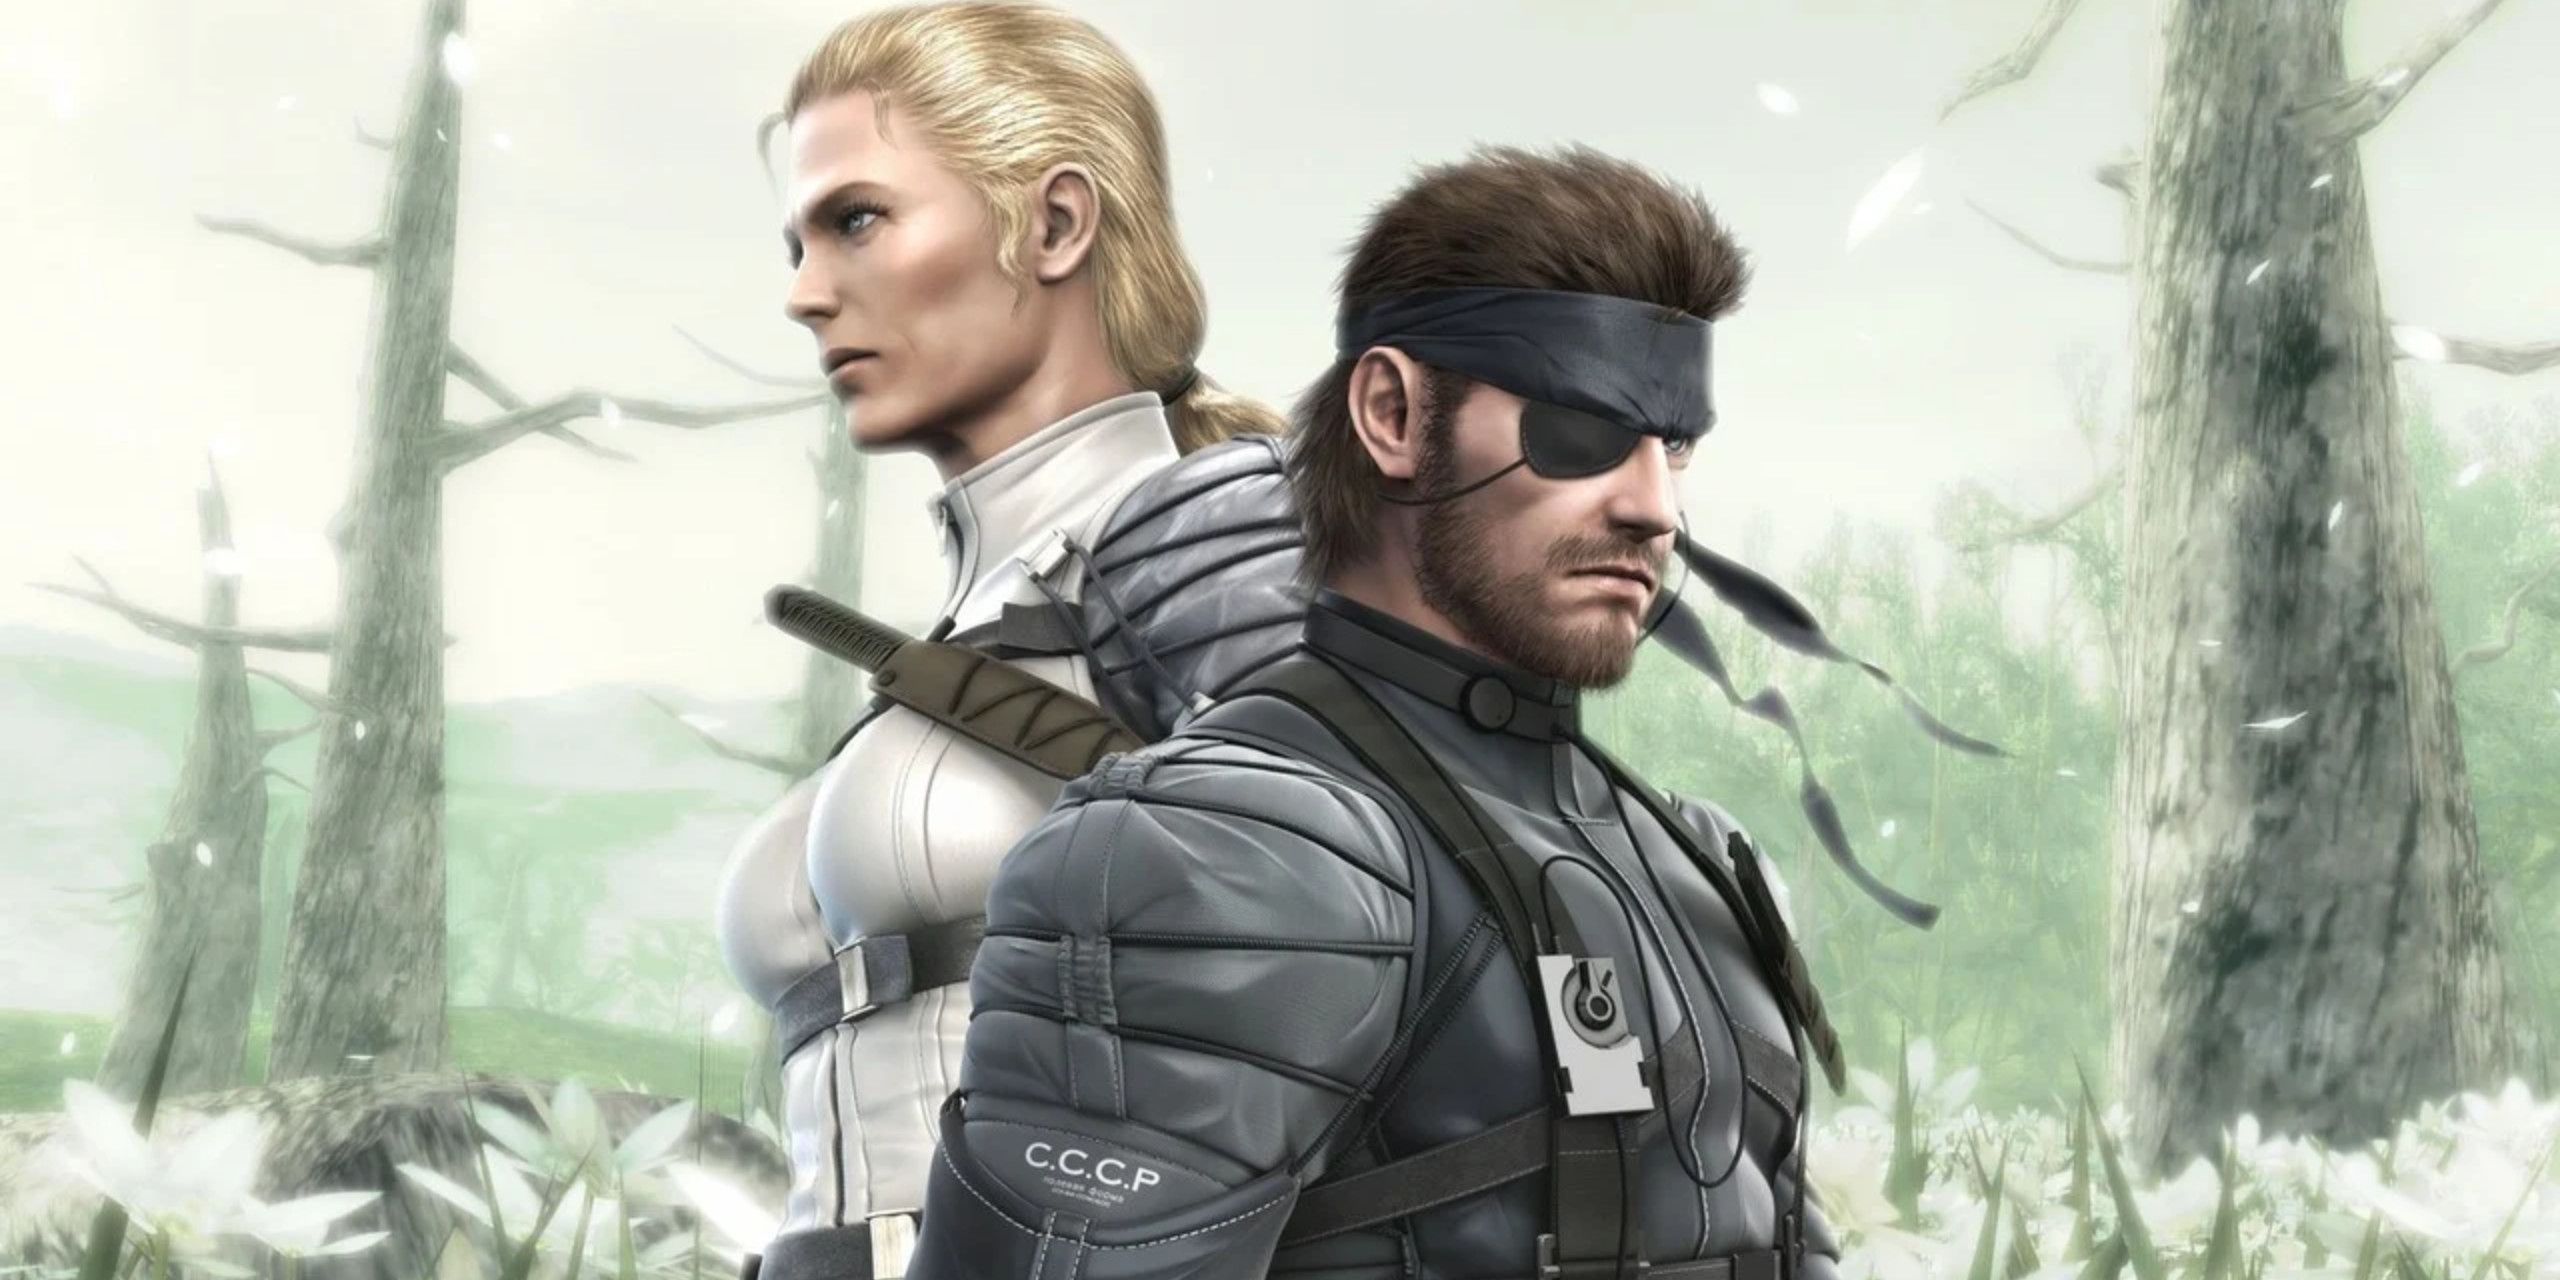 Naked Snake and The Boss standing back to back at the site of their final battle